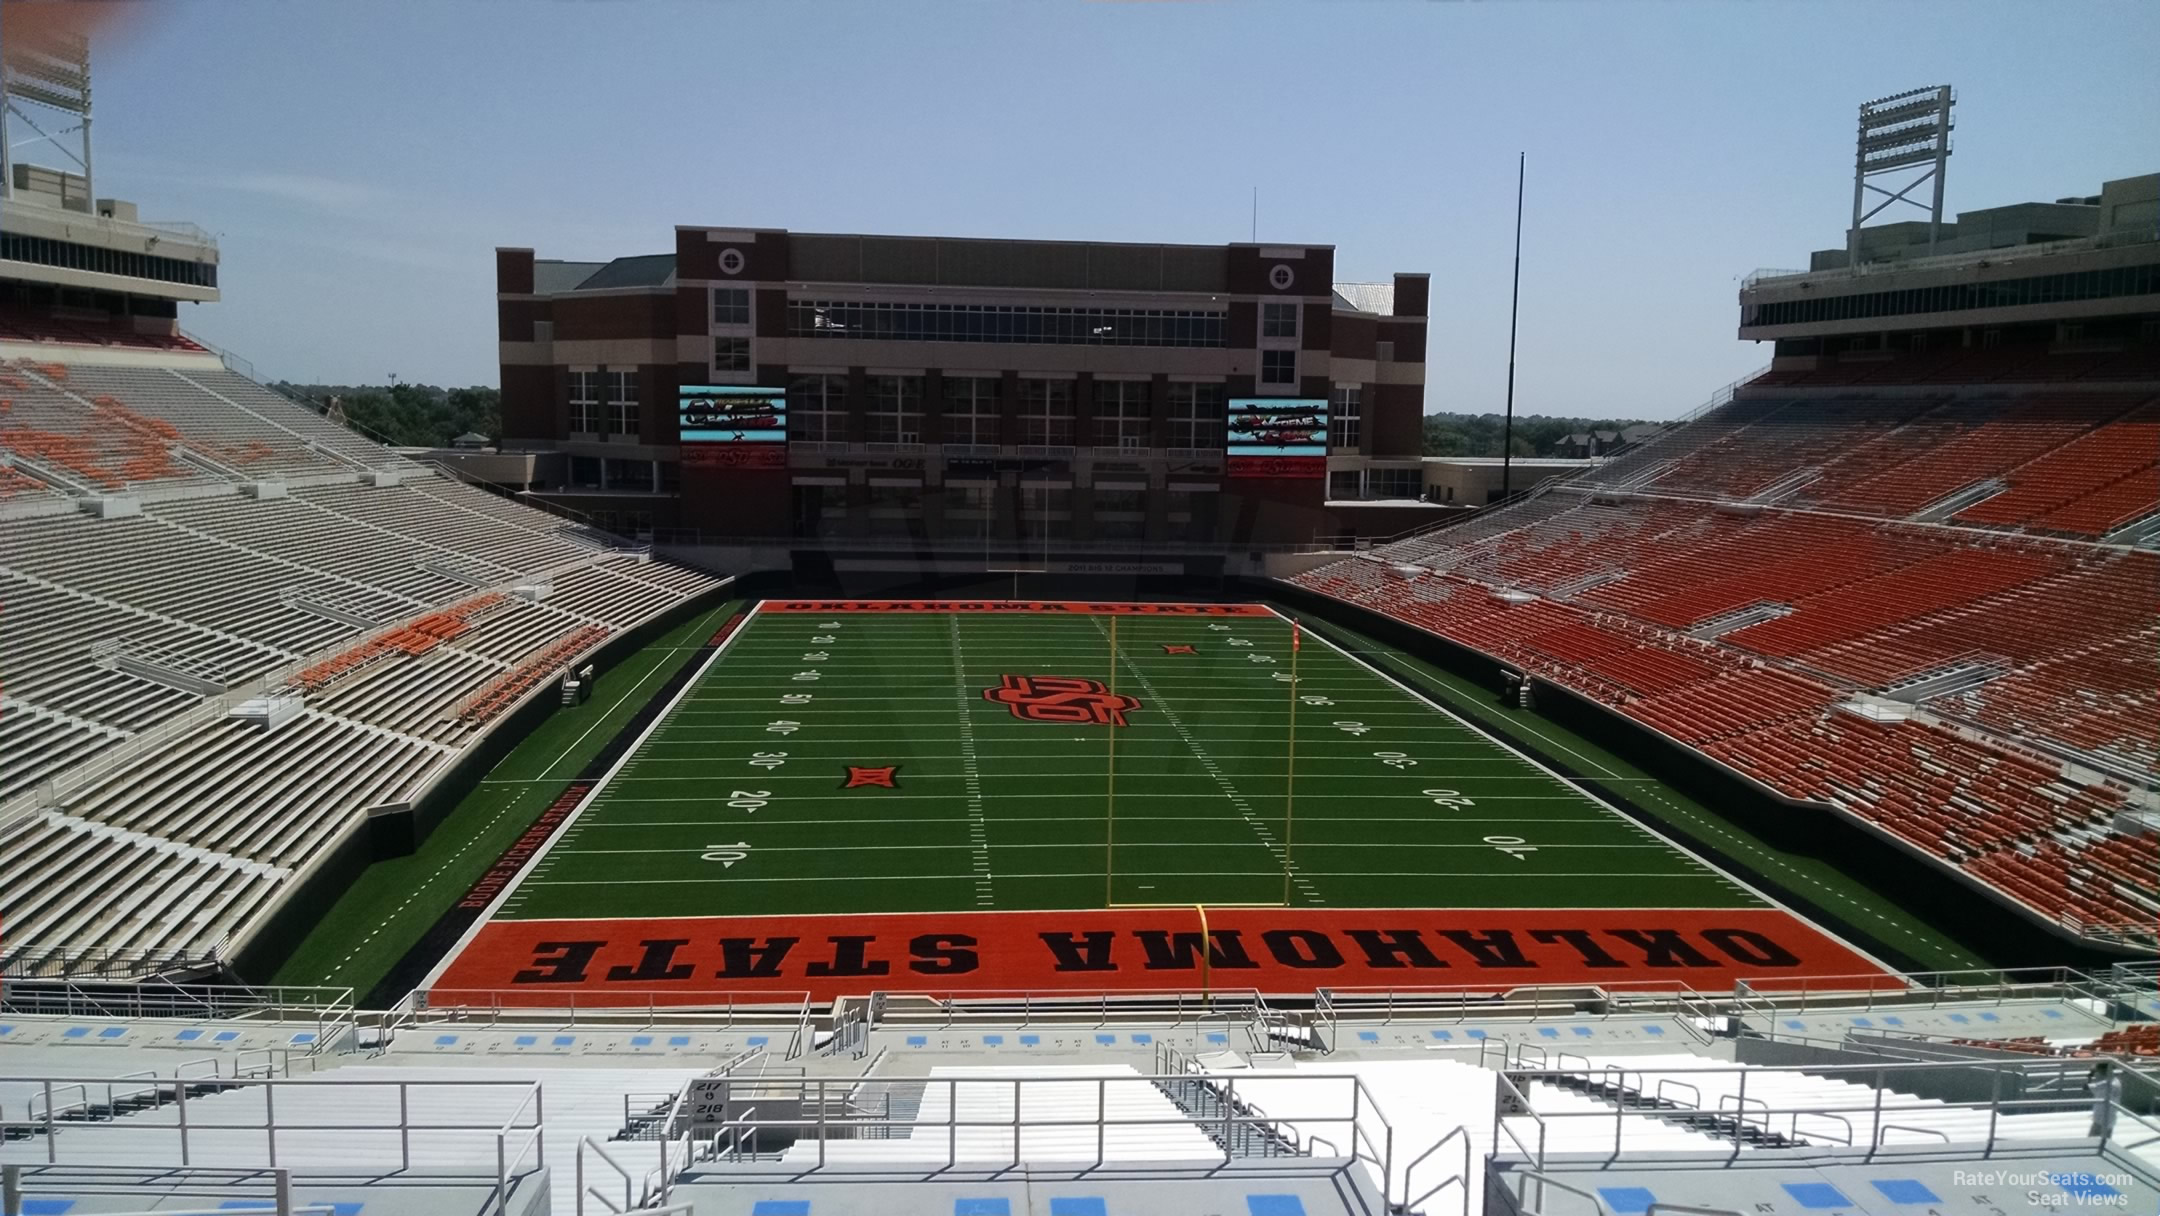 section 320, row 19 seat view  - boone pickens stadium